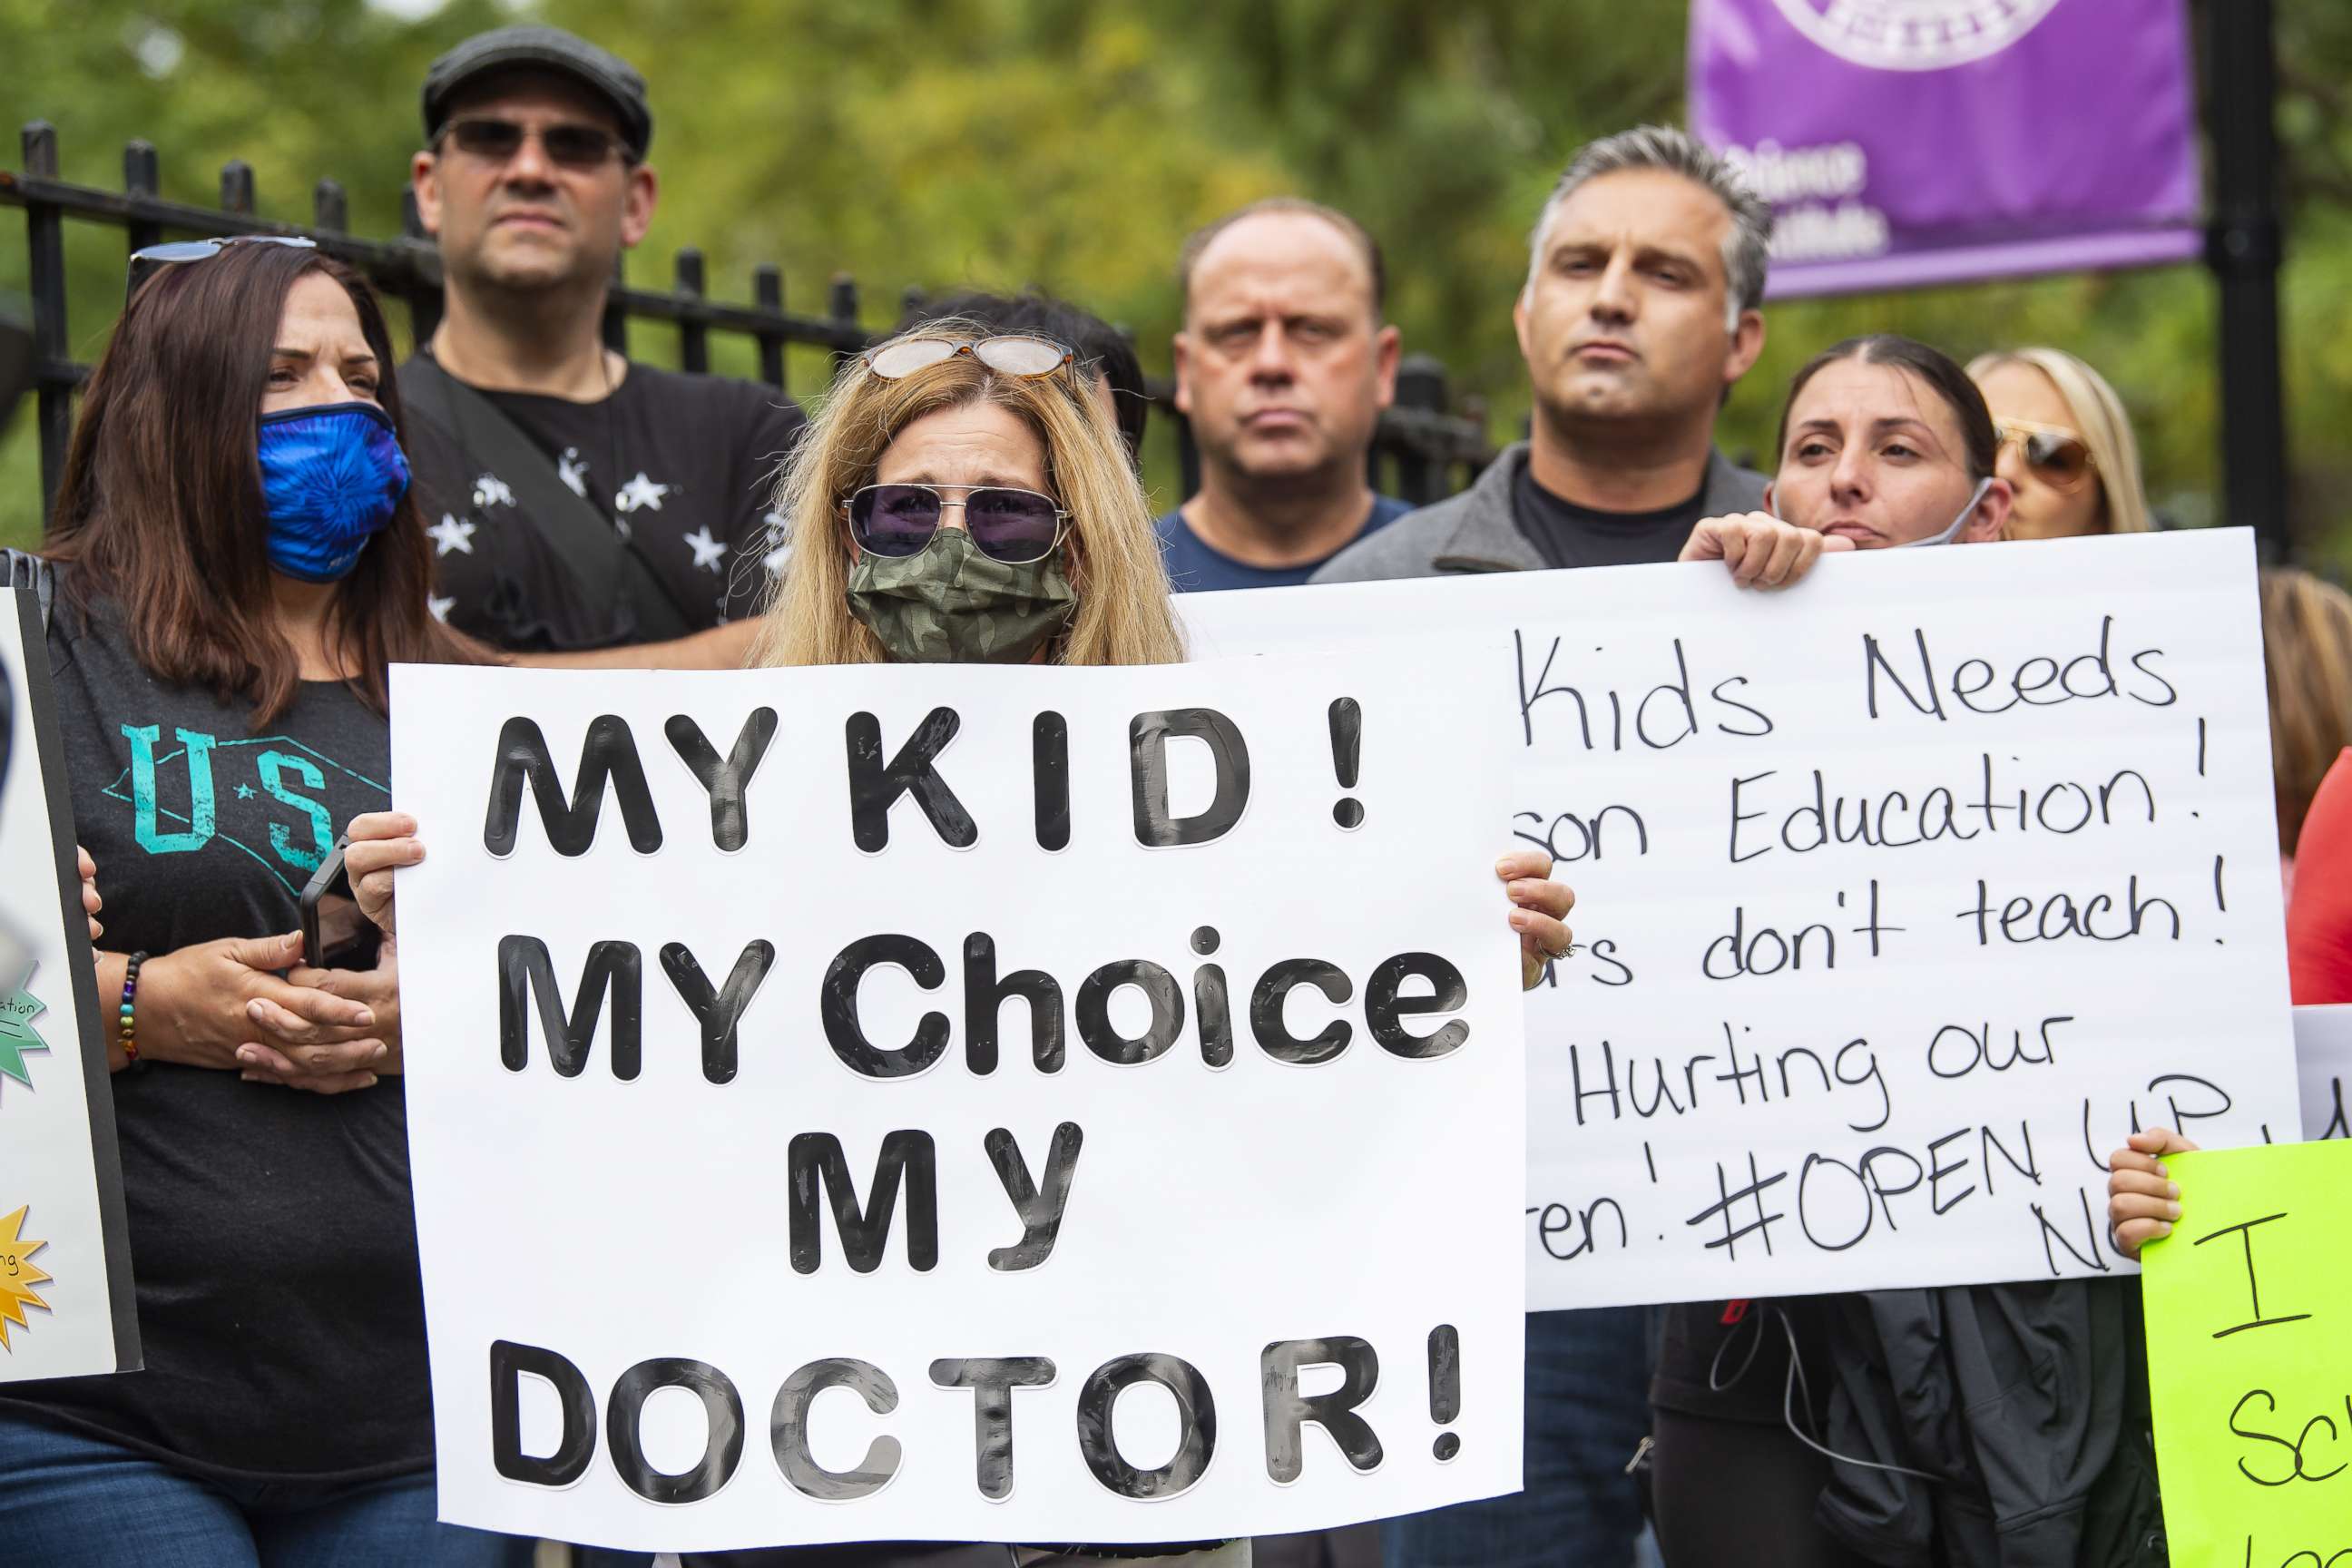 PHOTO: Parents and students gather to protest plans for the New York City public school system, including the required Covid testing by school doctors, in Staten Island, New York, Oct. 1, 2020.